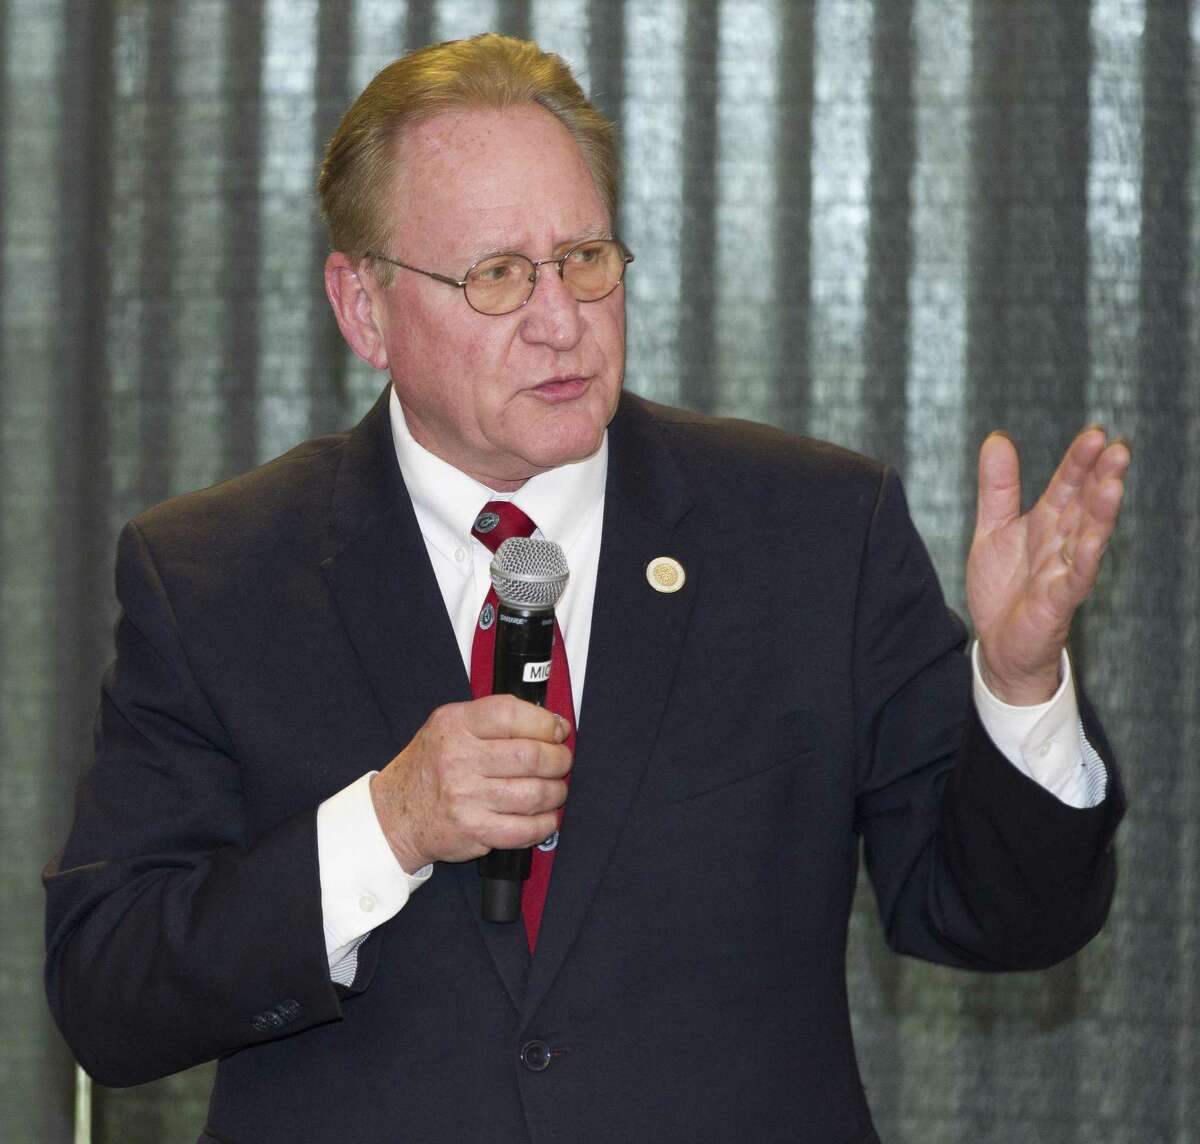 State Rep. Mark Keough, Republican candidate for Montgomery County Judge, speaks during the Conroe/Lake Conroe Chamber of Commerce candidate forum at the Lone Star Convention & Expo Center, Tuesday, Feb. 6, 2018, in Conroe.